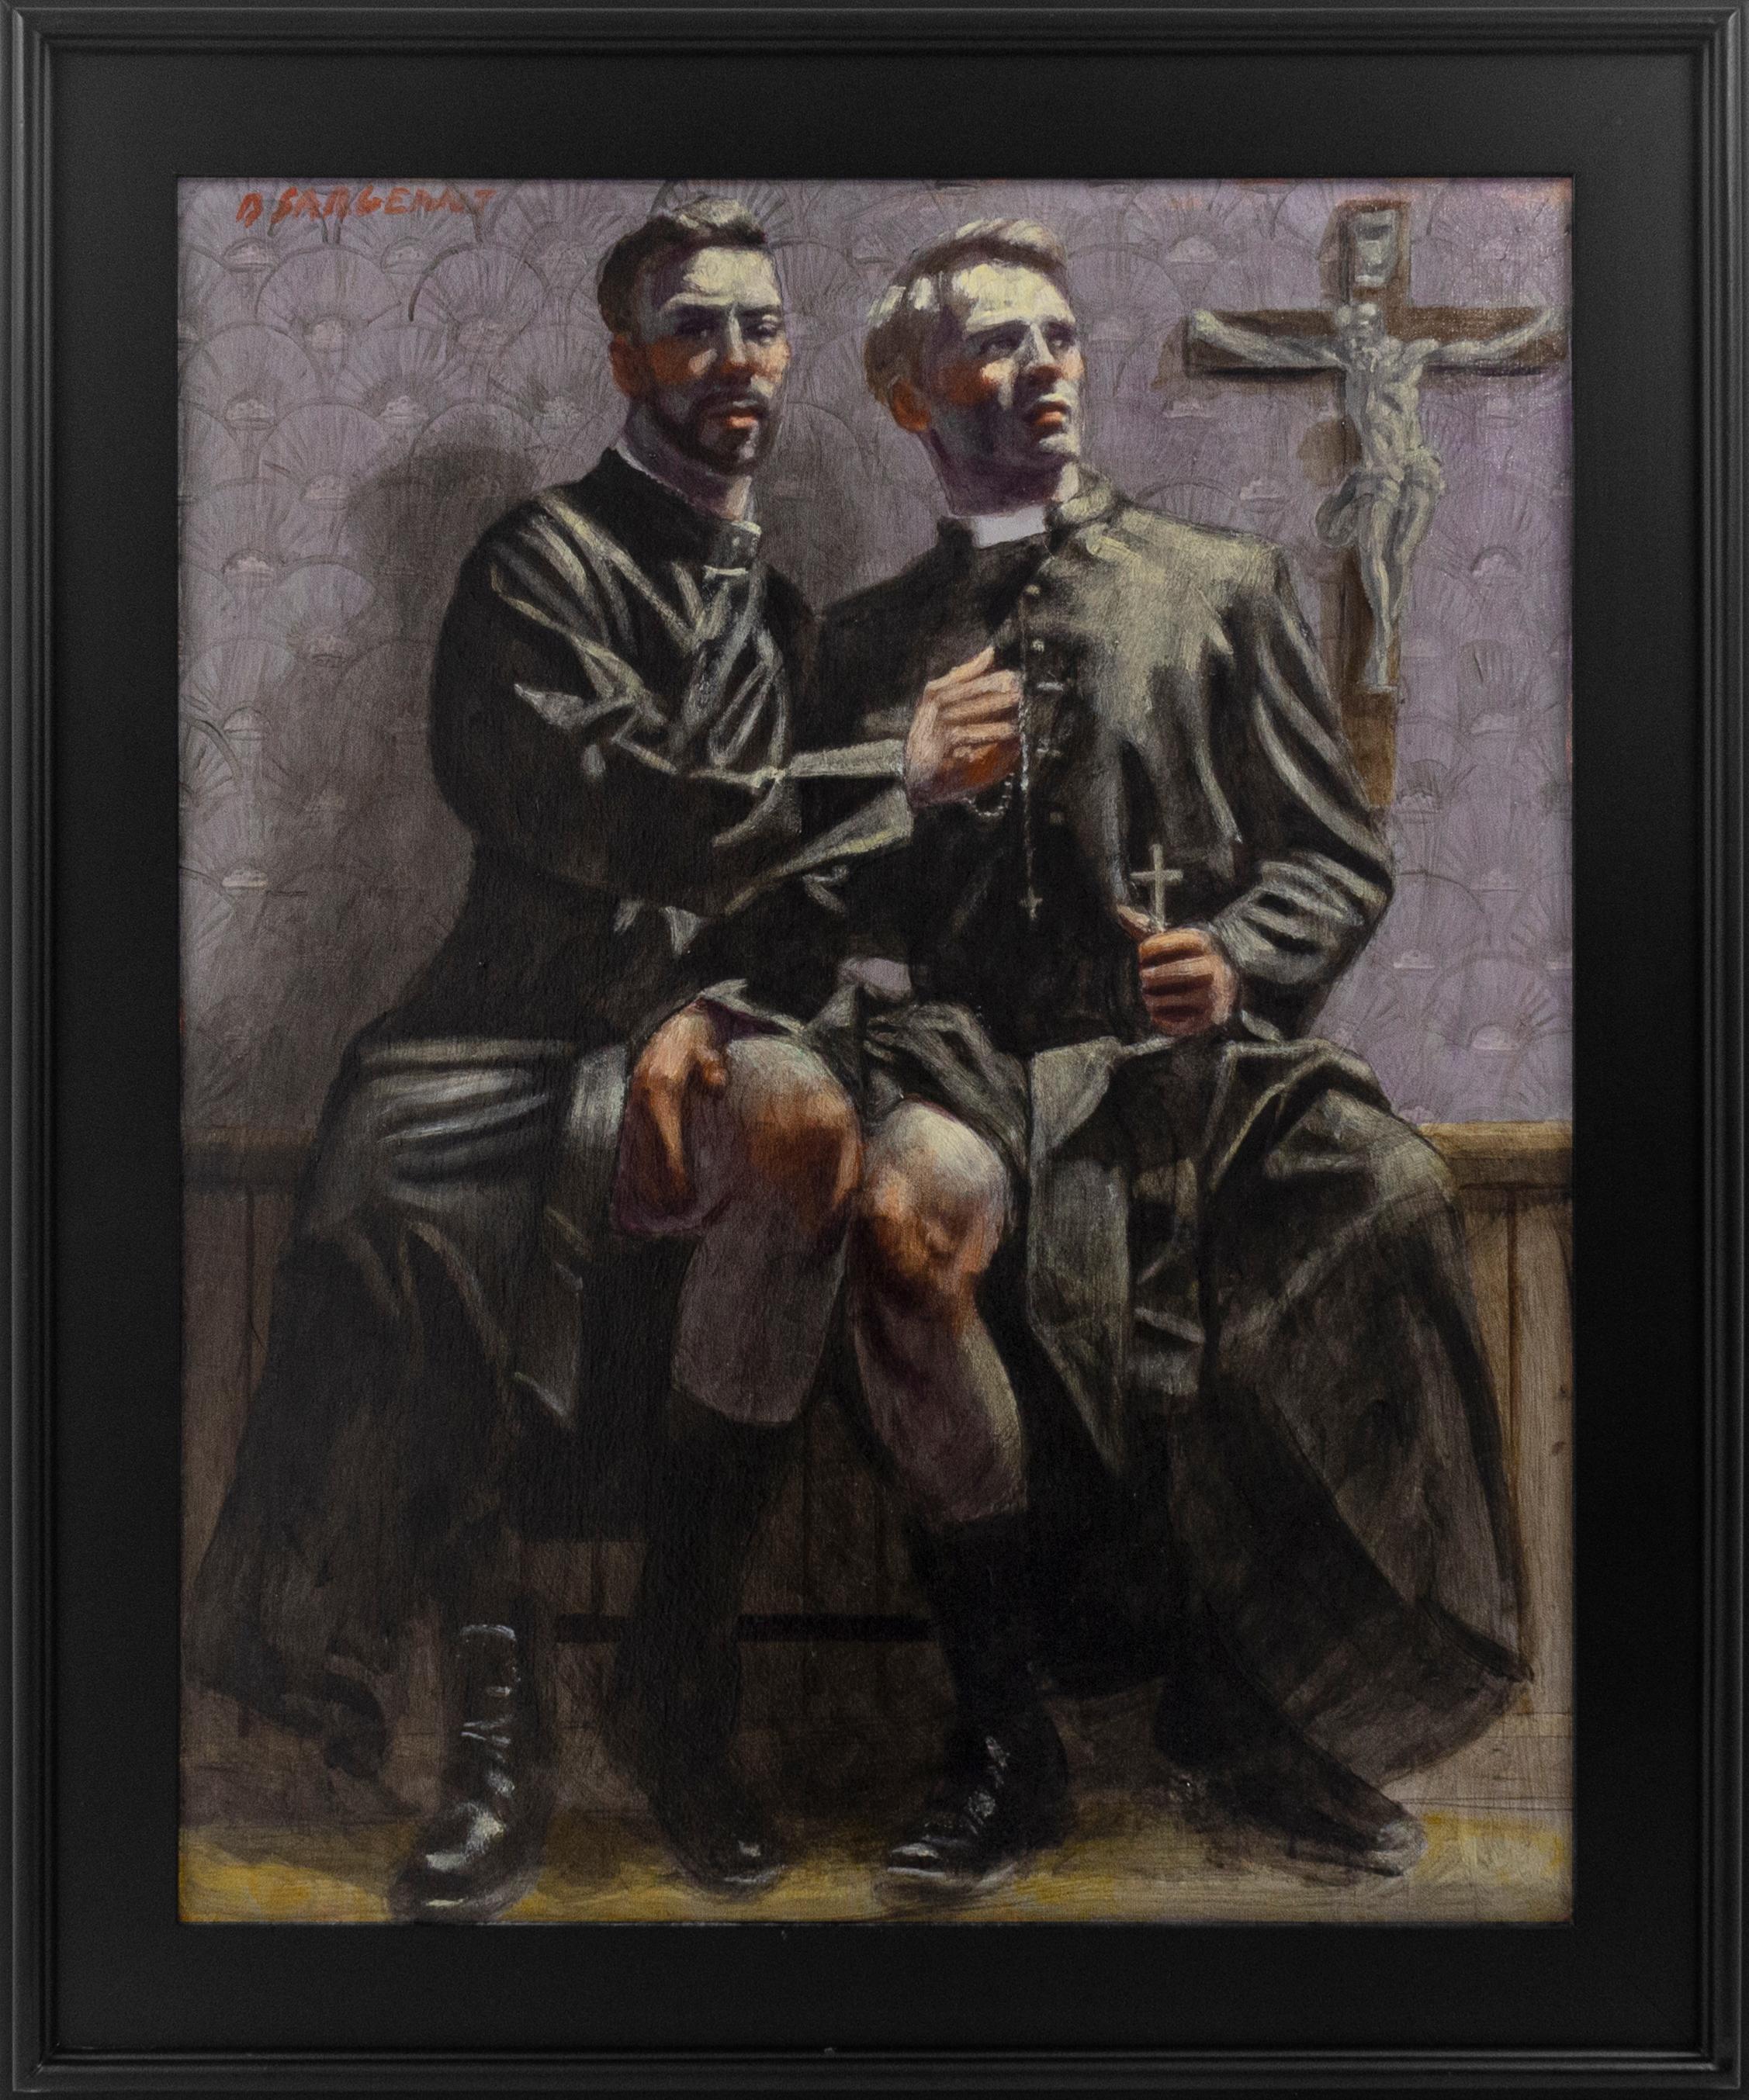 [Bruce Sargeant (1898-1938)] Two Priests in Their Robes - Painting by Mark Beard